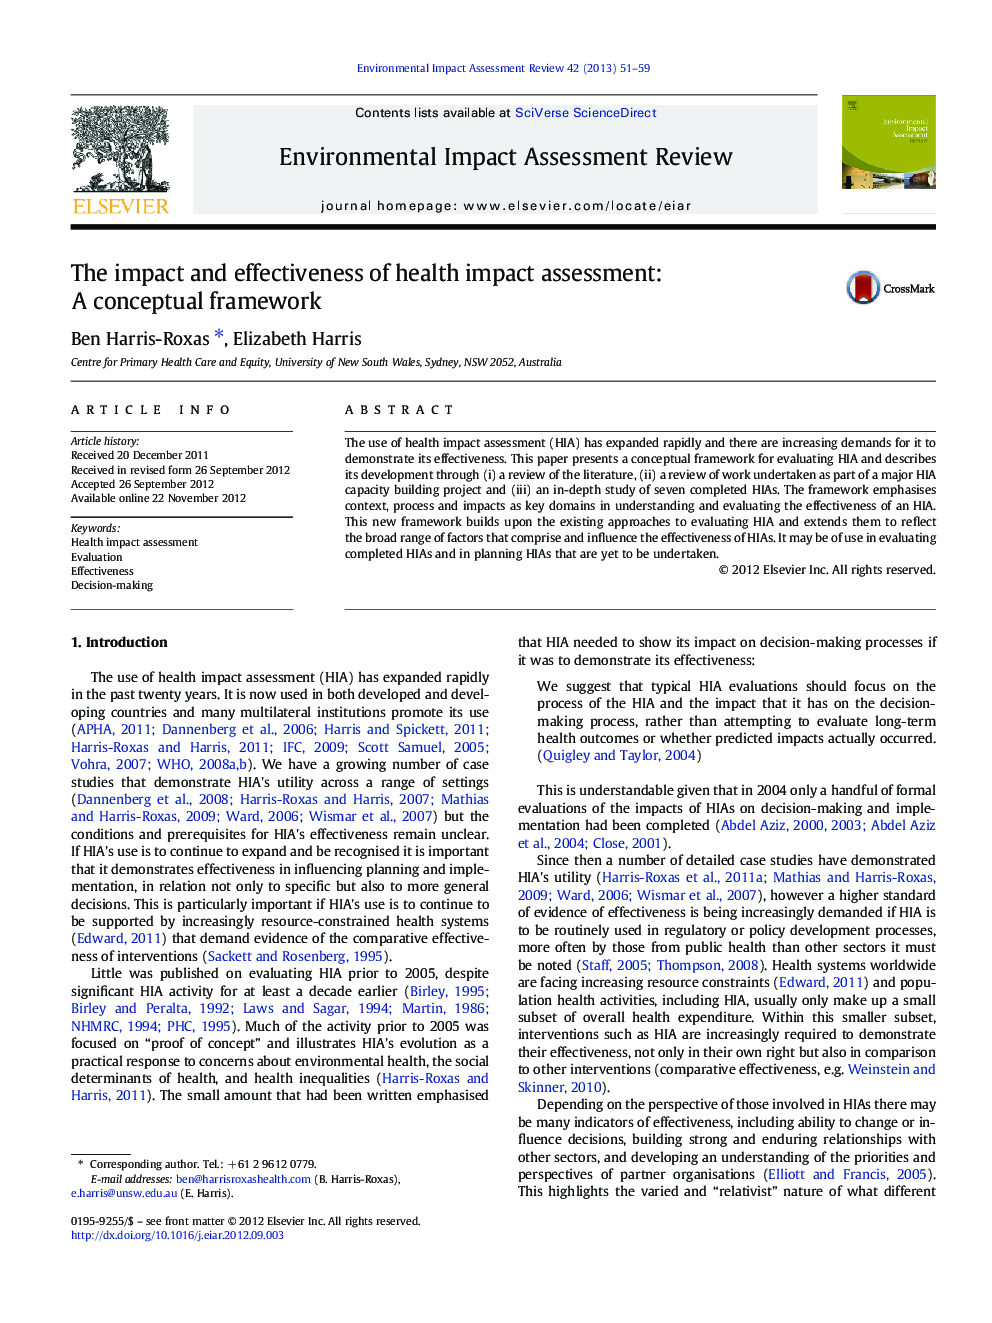 The impact and effectiveness of health impact assessment: A conceptual framework